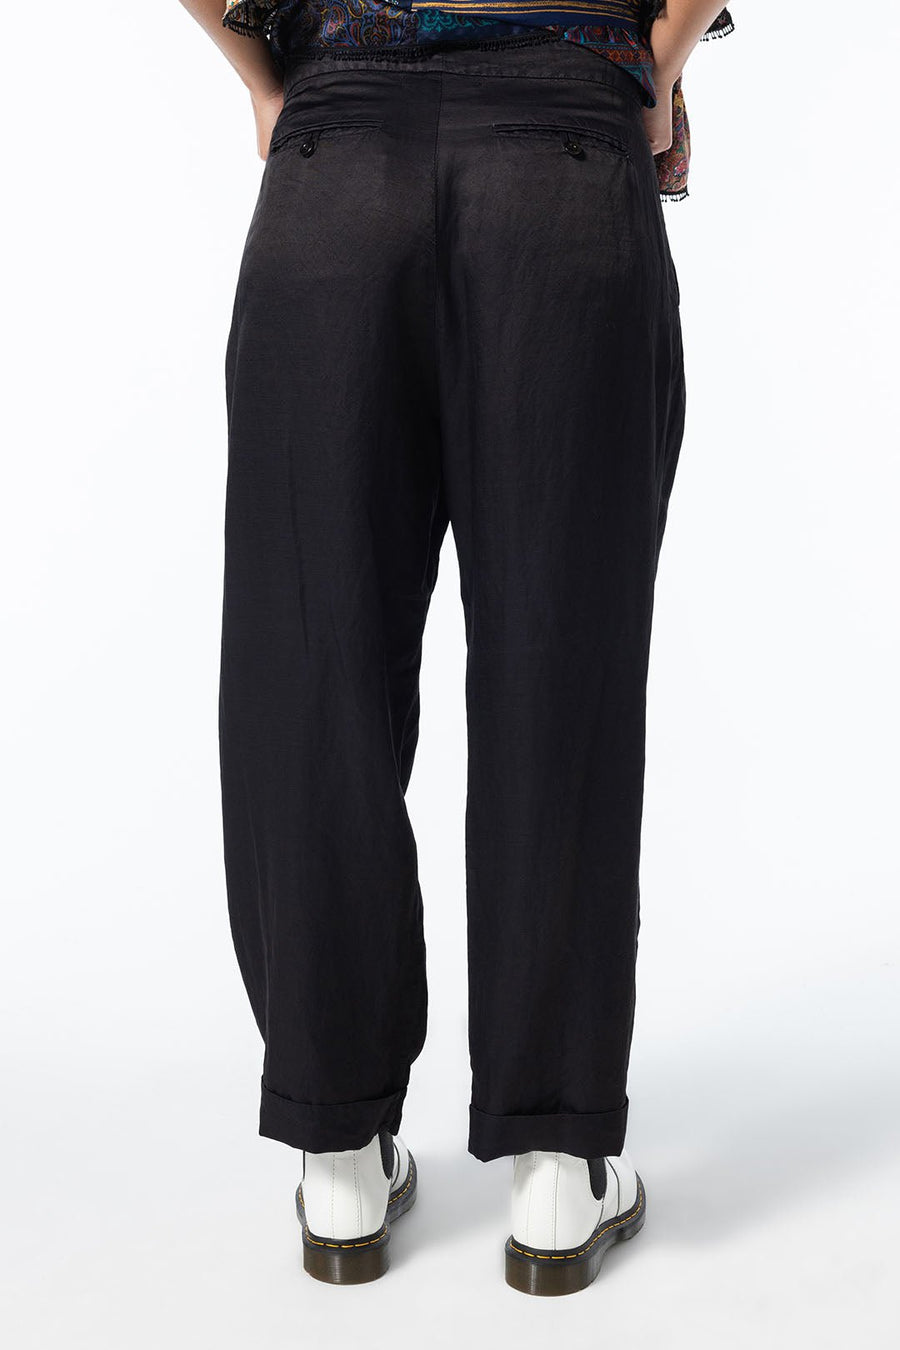 WALLACE TROUSERS, BLACK - Burning Torch Online Boutique